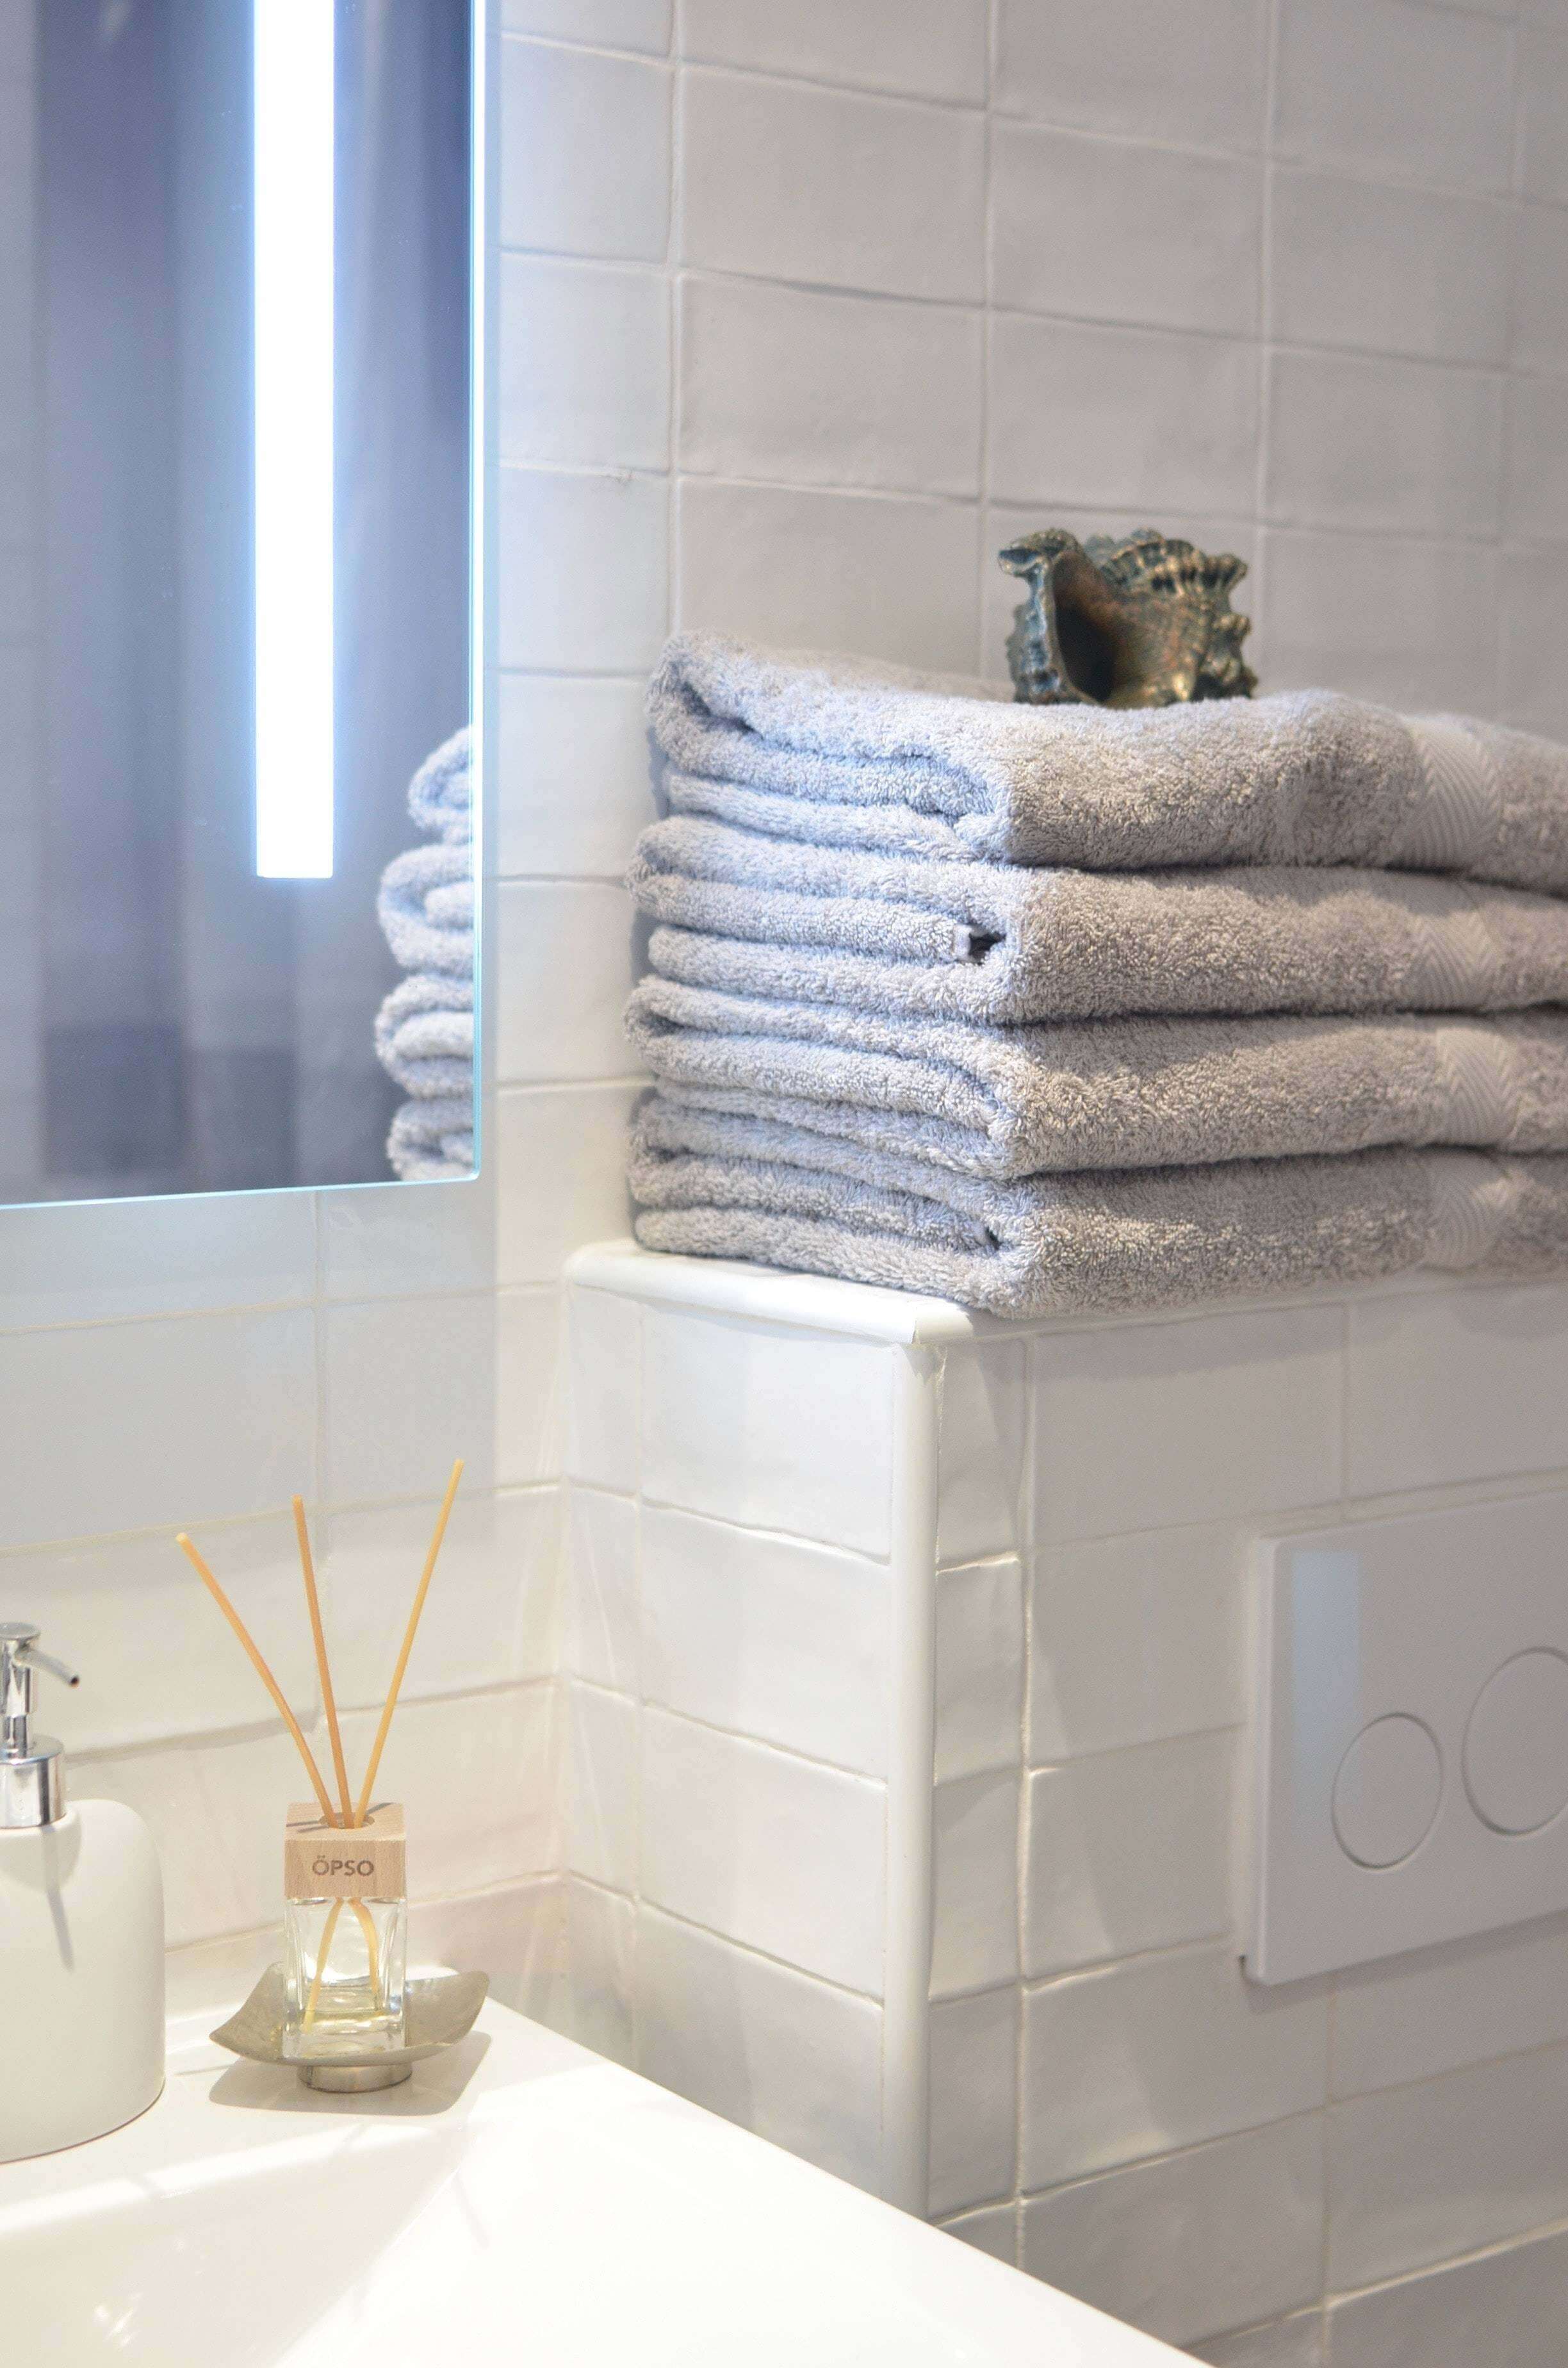 How often do you have to change your bath towels?